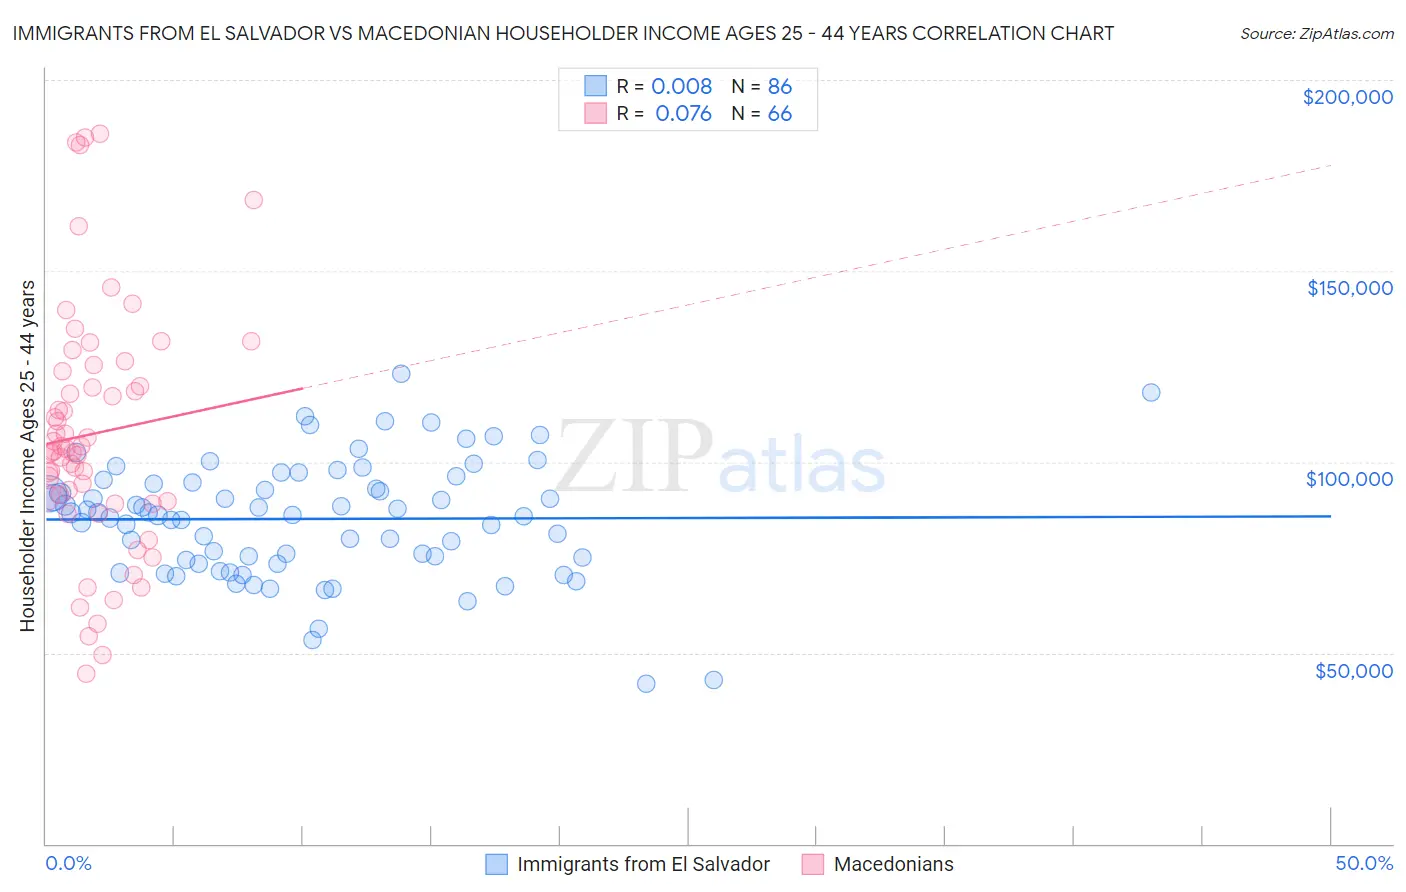 Immigrants from El Salvador vs Macedonian Householder Income Ages 25 - 44 years